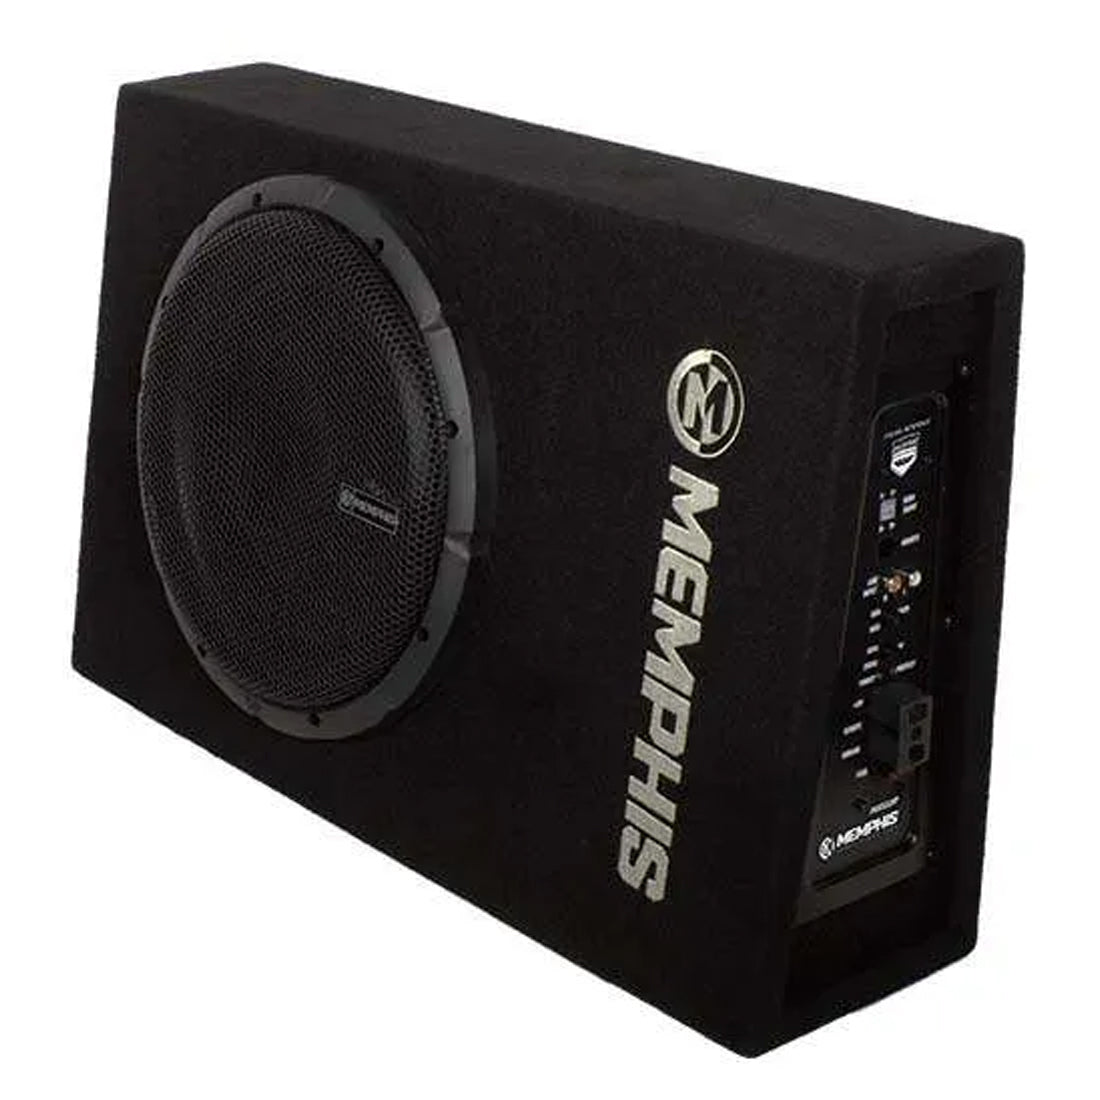 Memphis Audio PRXS112SP Power Reference 12" Shallow Loaded Subwoofer Enclosure